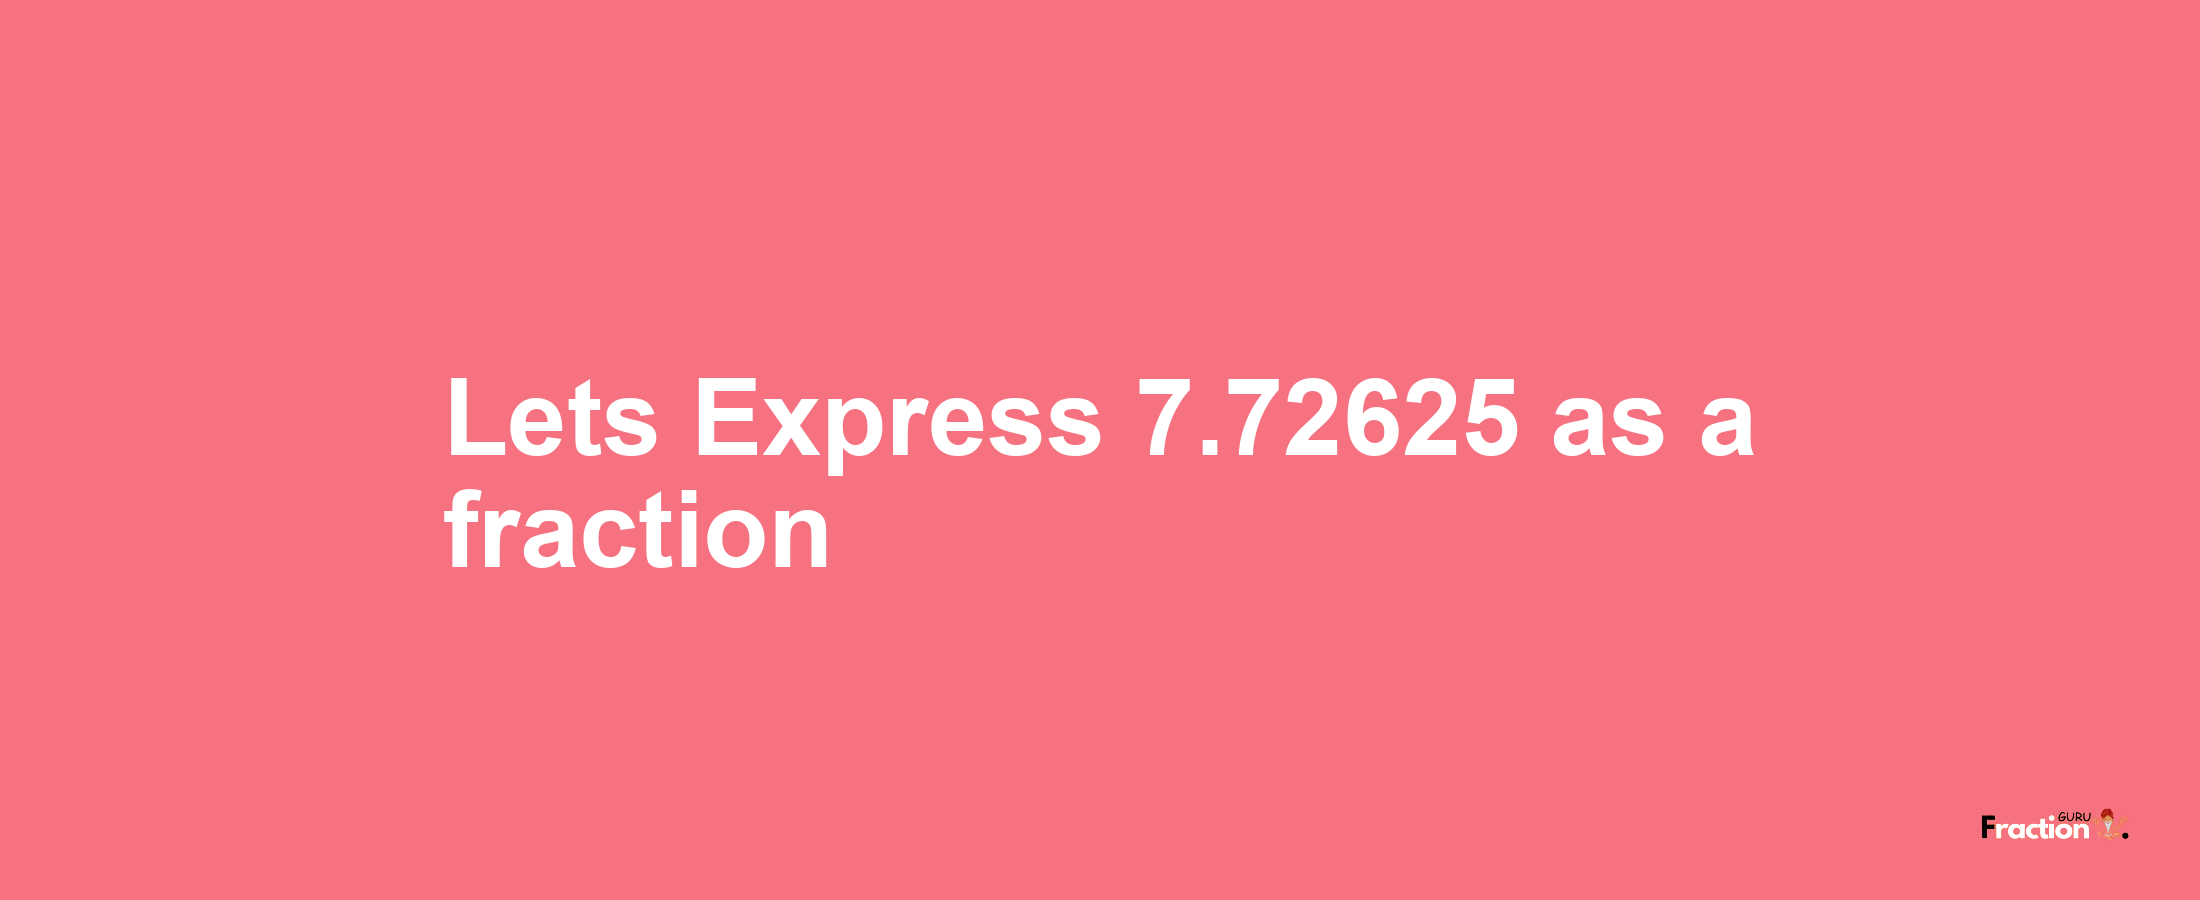 Lets Express 7.72625 as afraction